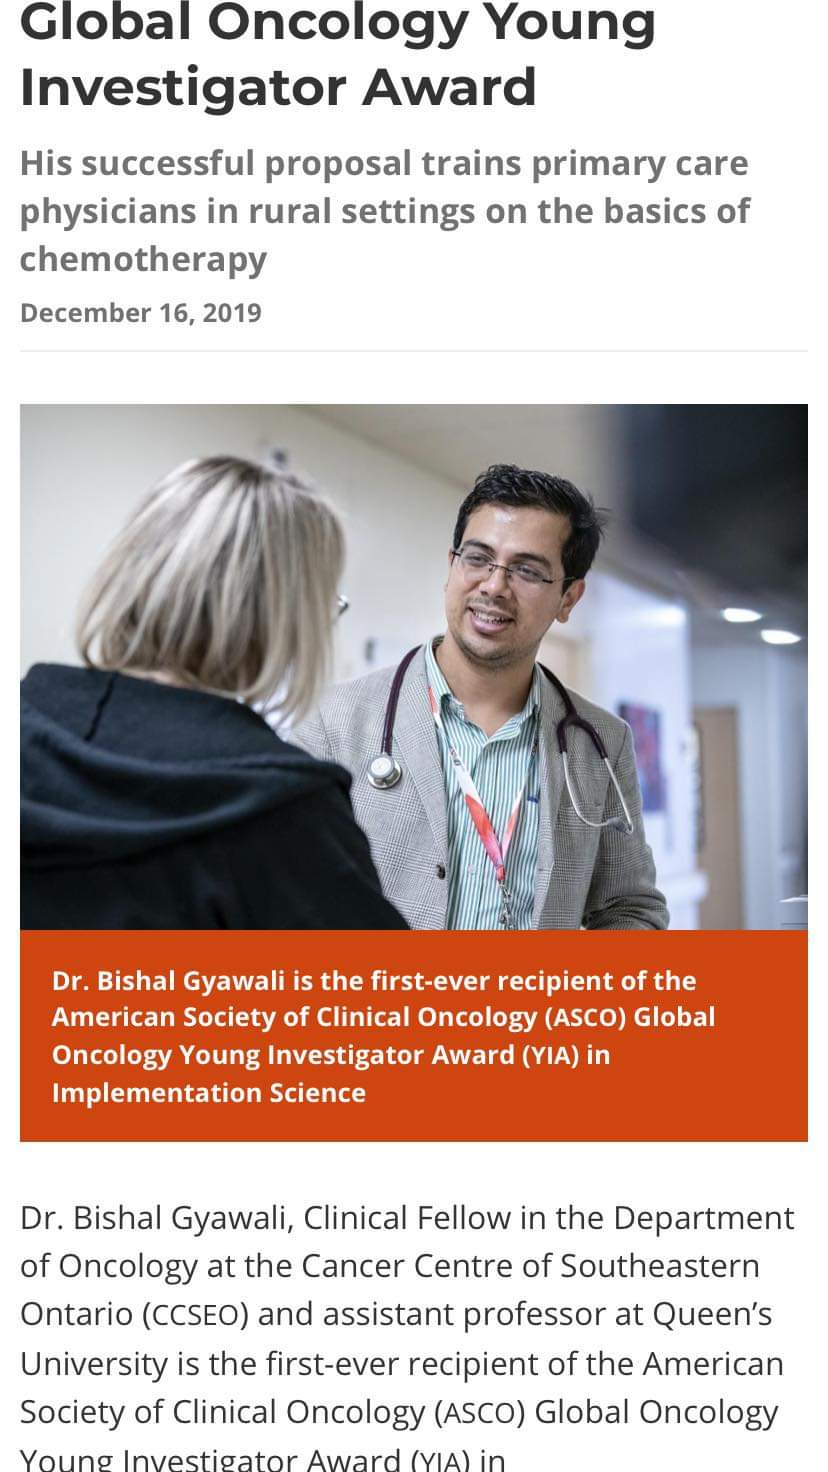 Research funding to early-career investigators TO Dr. Bishal Gyawali, Clinical Fellow